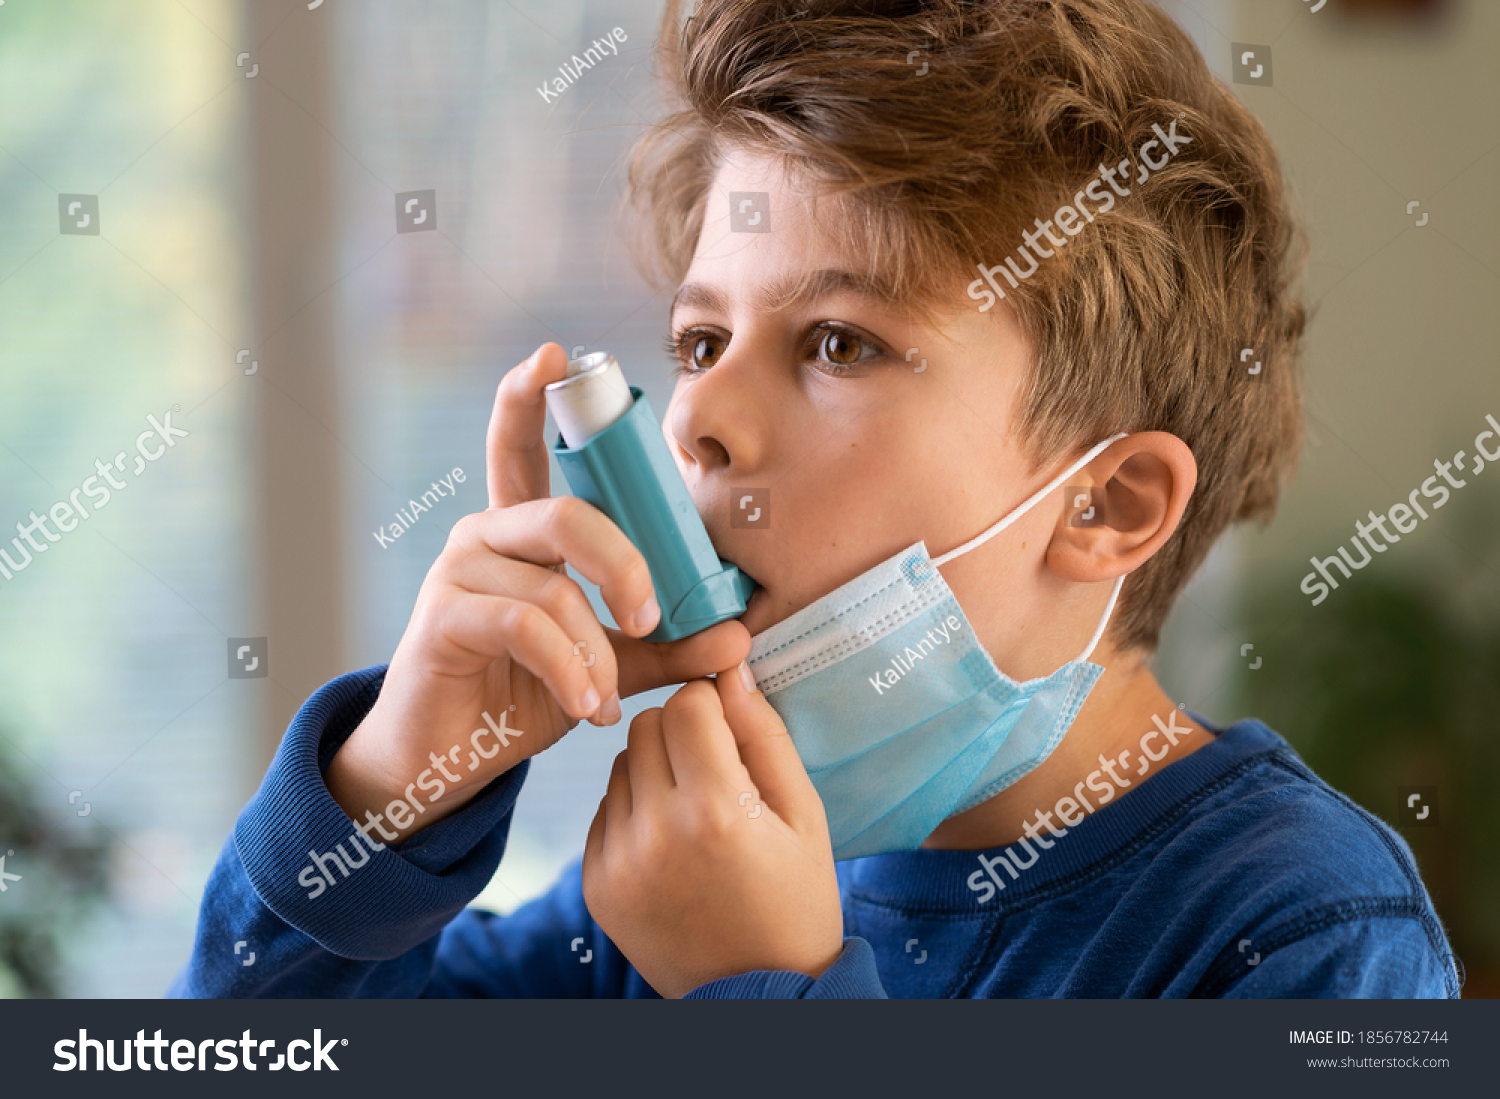 consultant Oefening aanpassen Young Boy Face Mask Using Asthma Stock Photo 1856782744 | Shutterstock